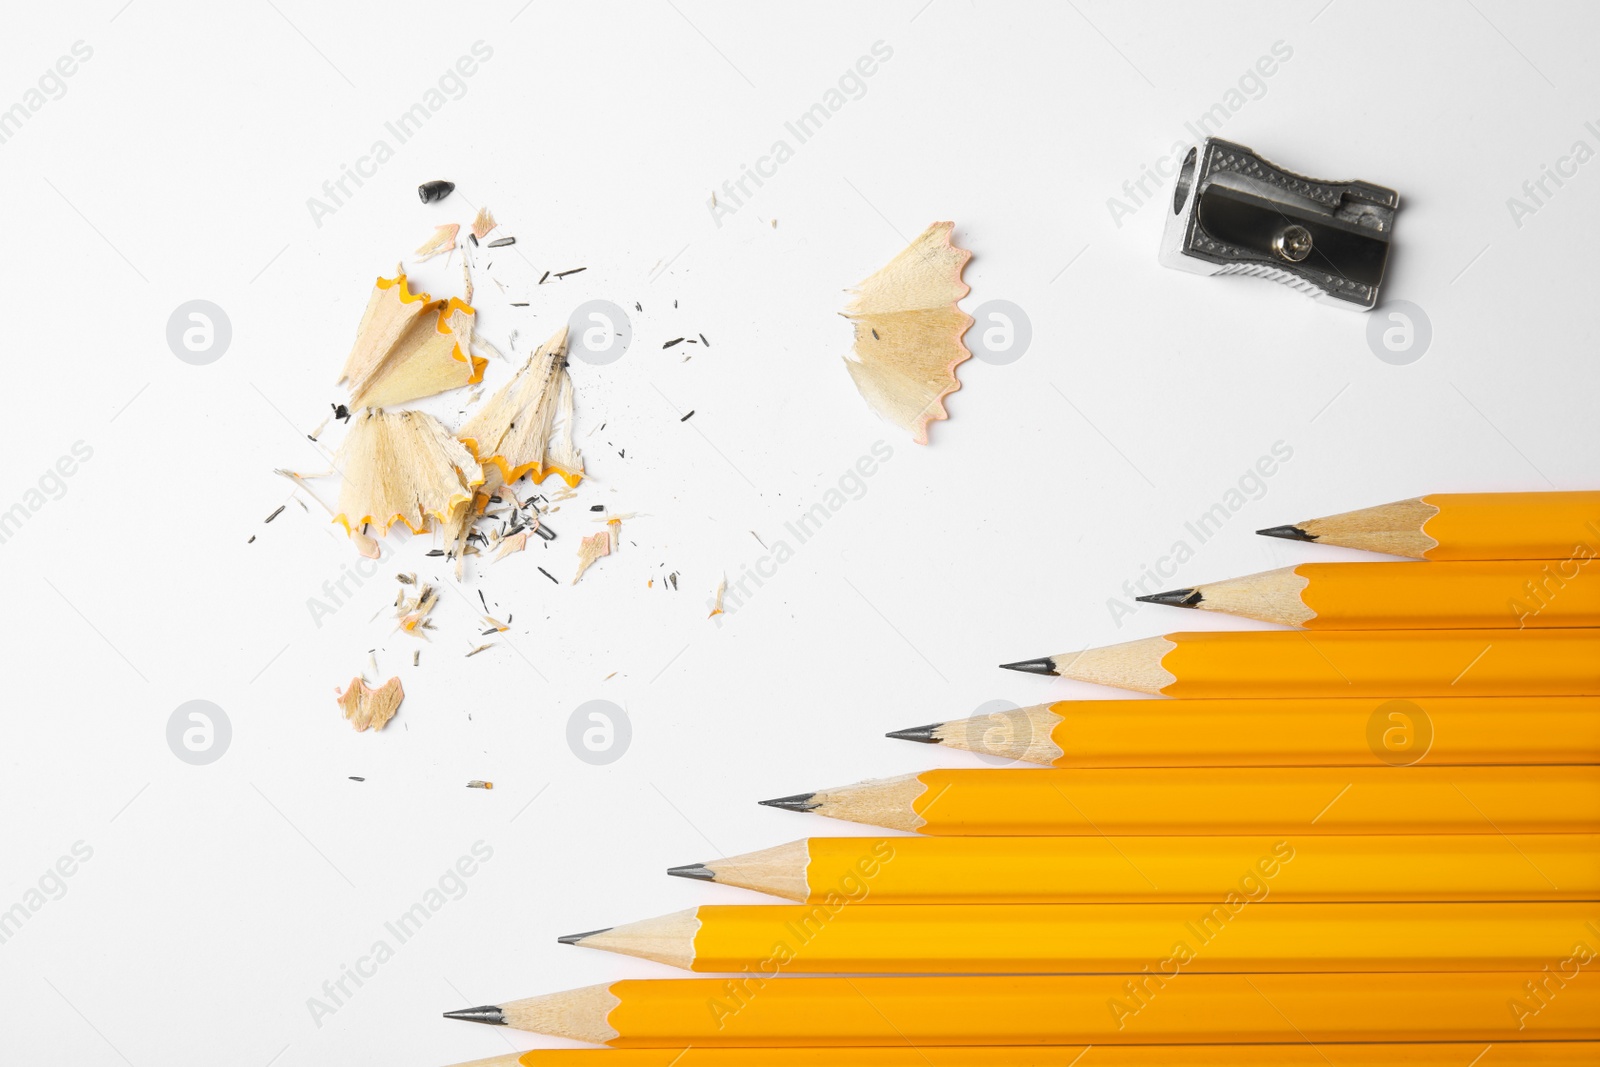 Photo of Graphite pencils, shavings and sharpener on white background, top view